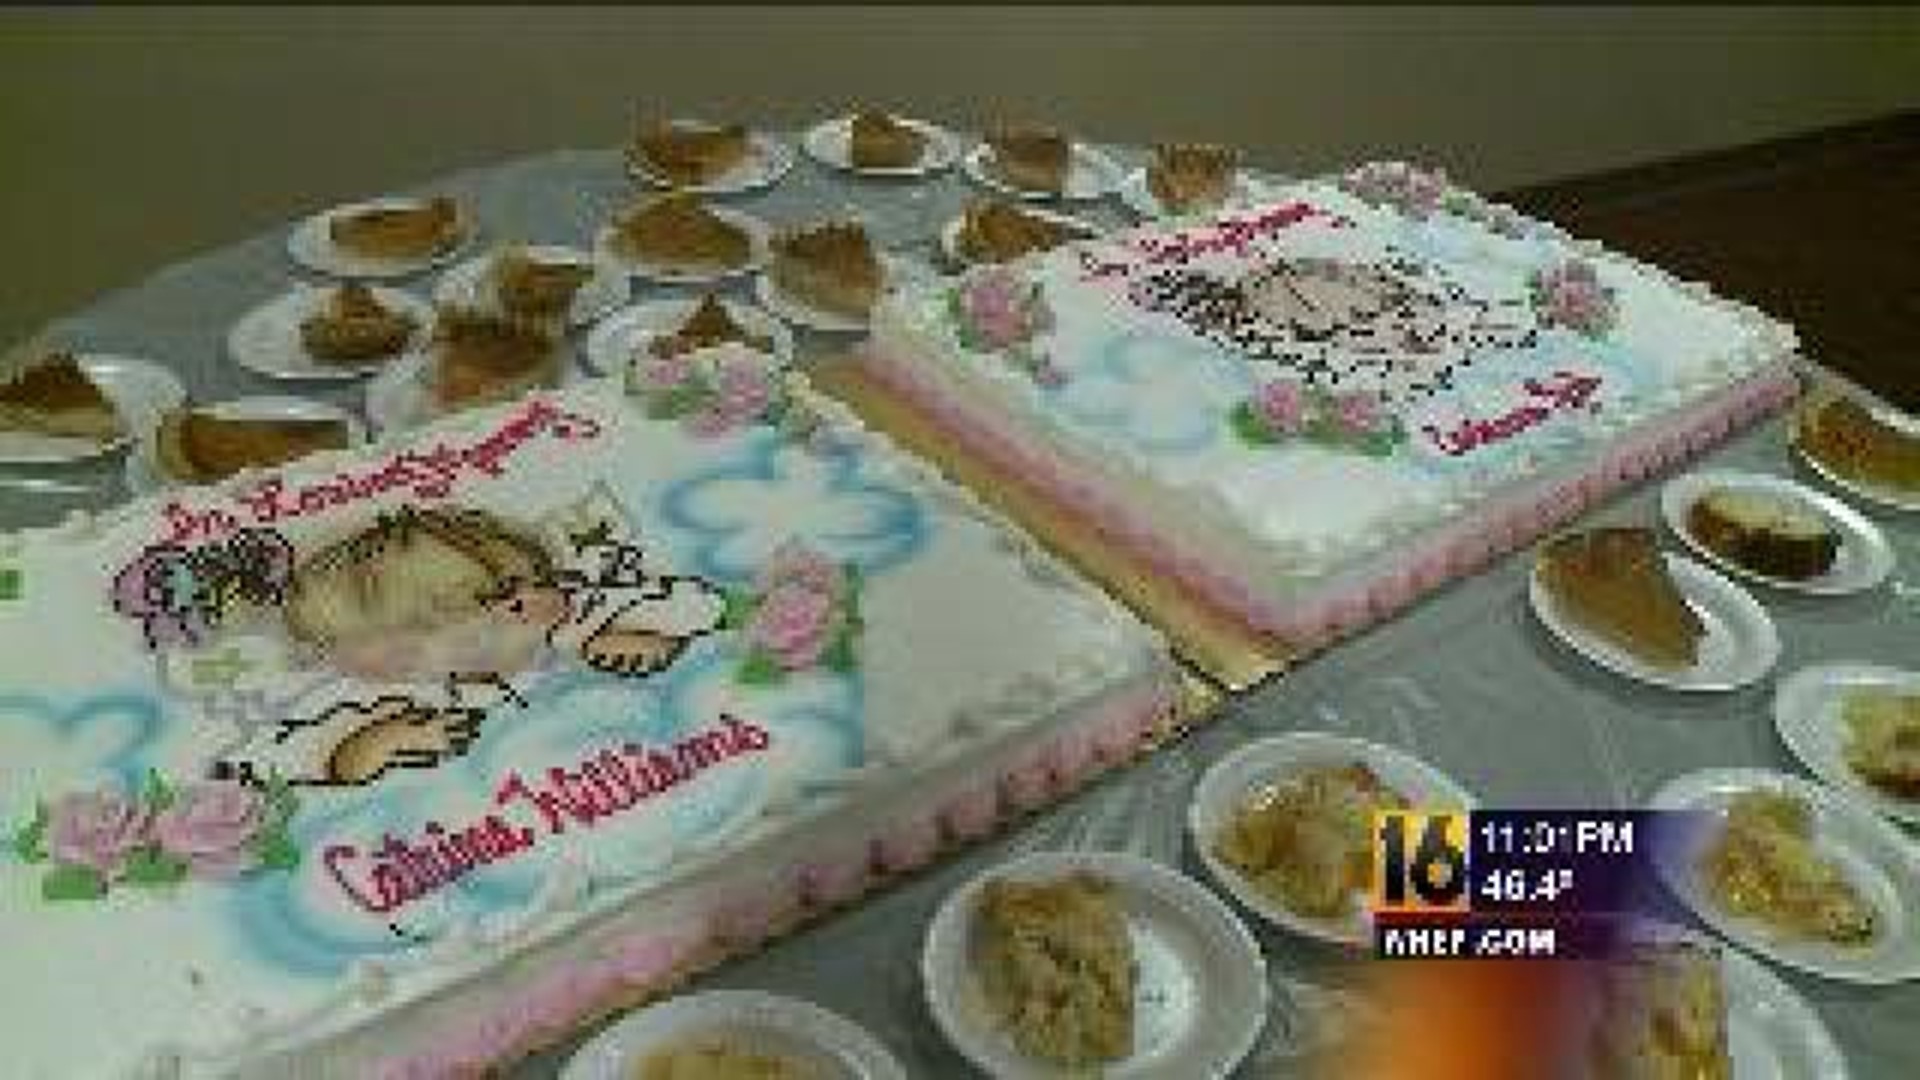 Benefit Held for Family of Crash Victims